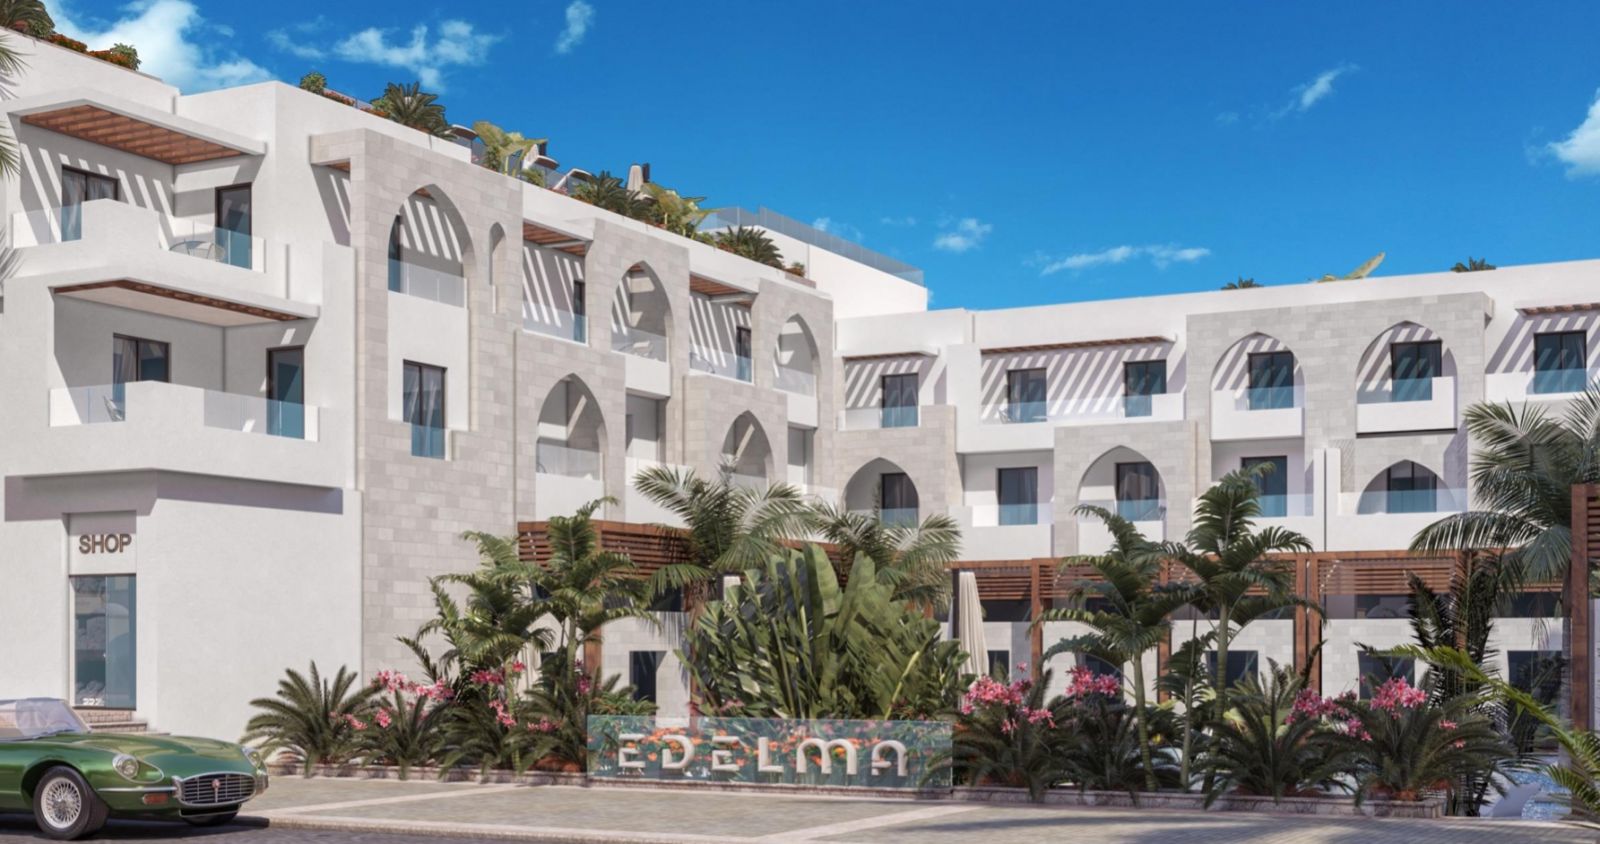 apartments for sale in edelma